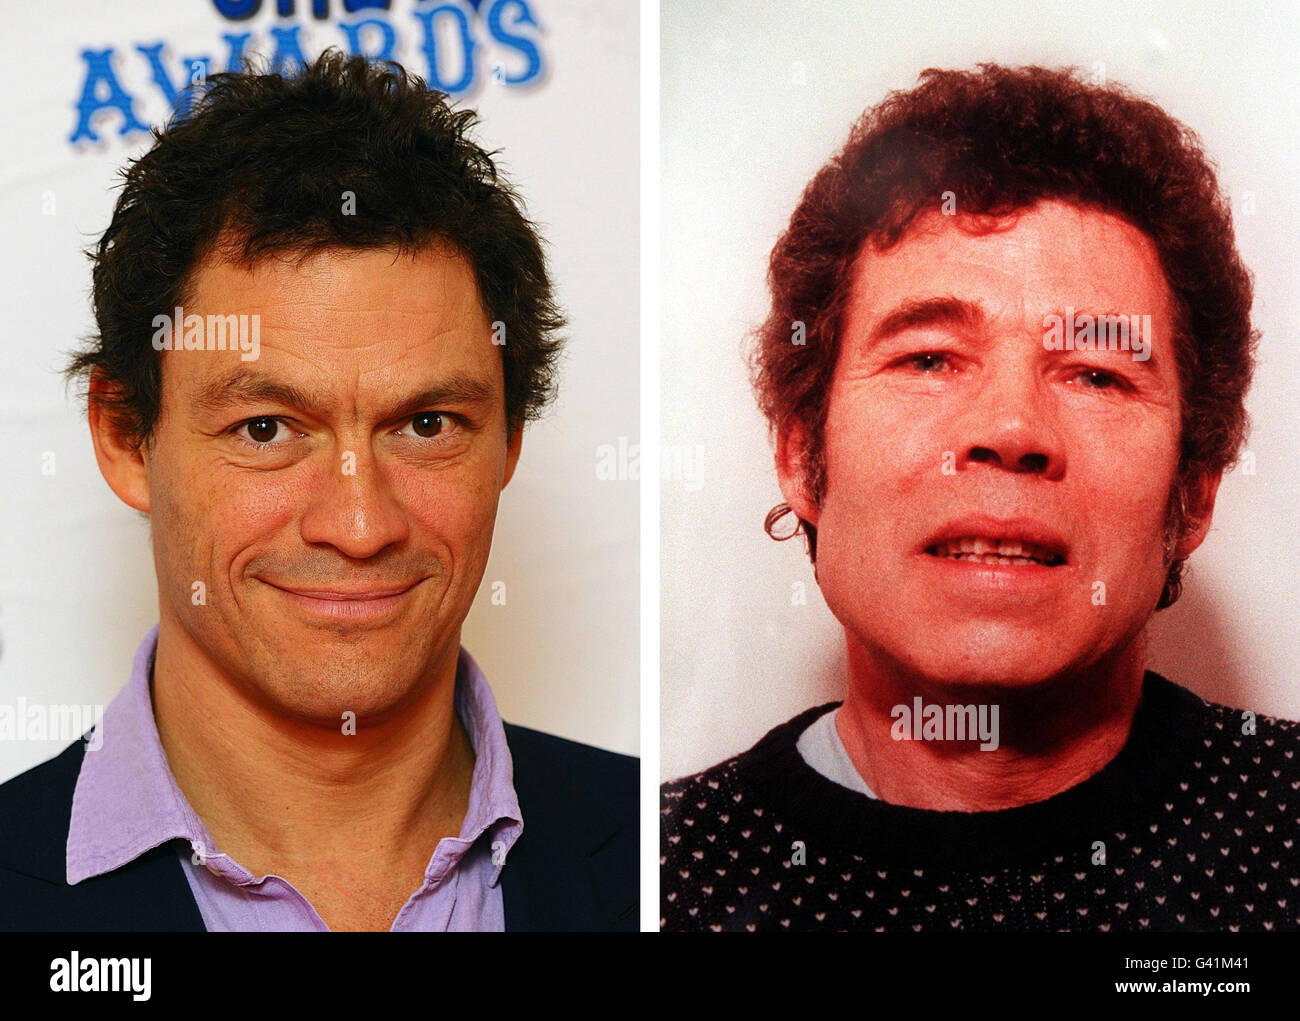 File photos of Dominic West (left) and serial killer Fred West. The Wire star Dominic West is set to play serial killer Fred West in a new ITV drama, it has been announced. Stock Photo